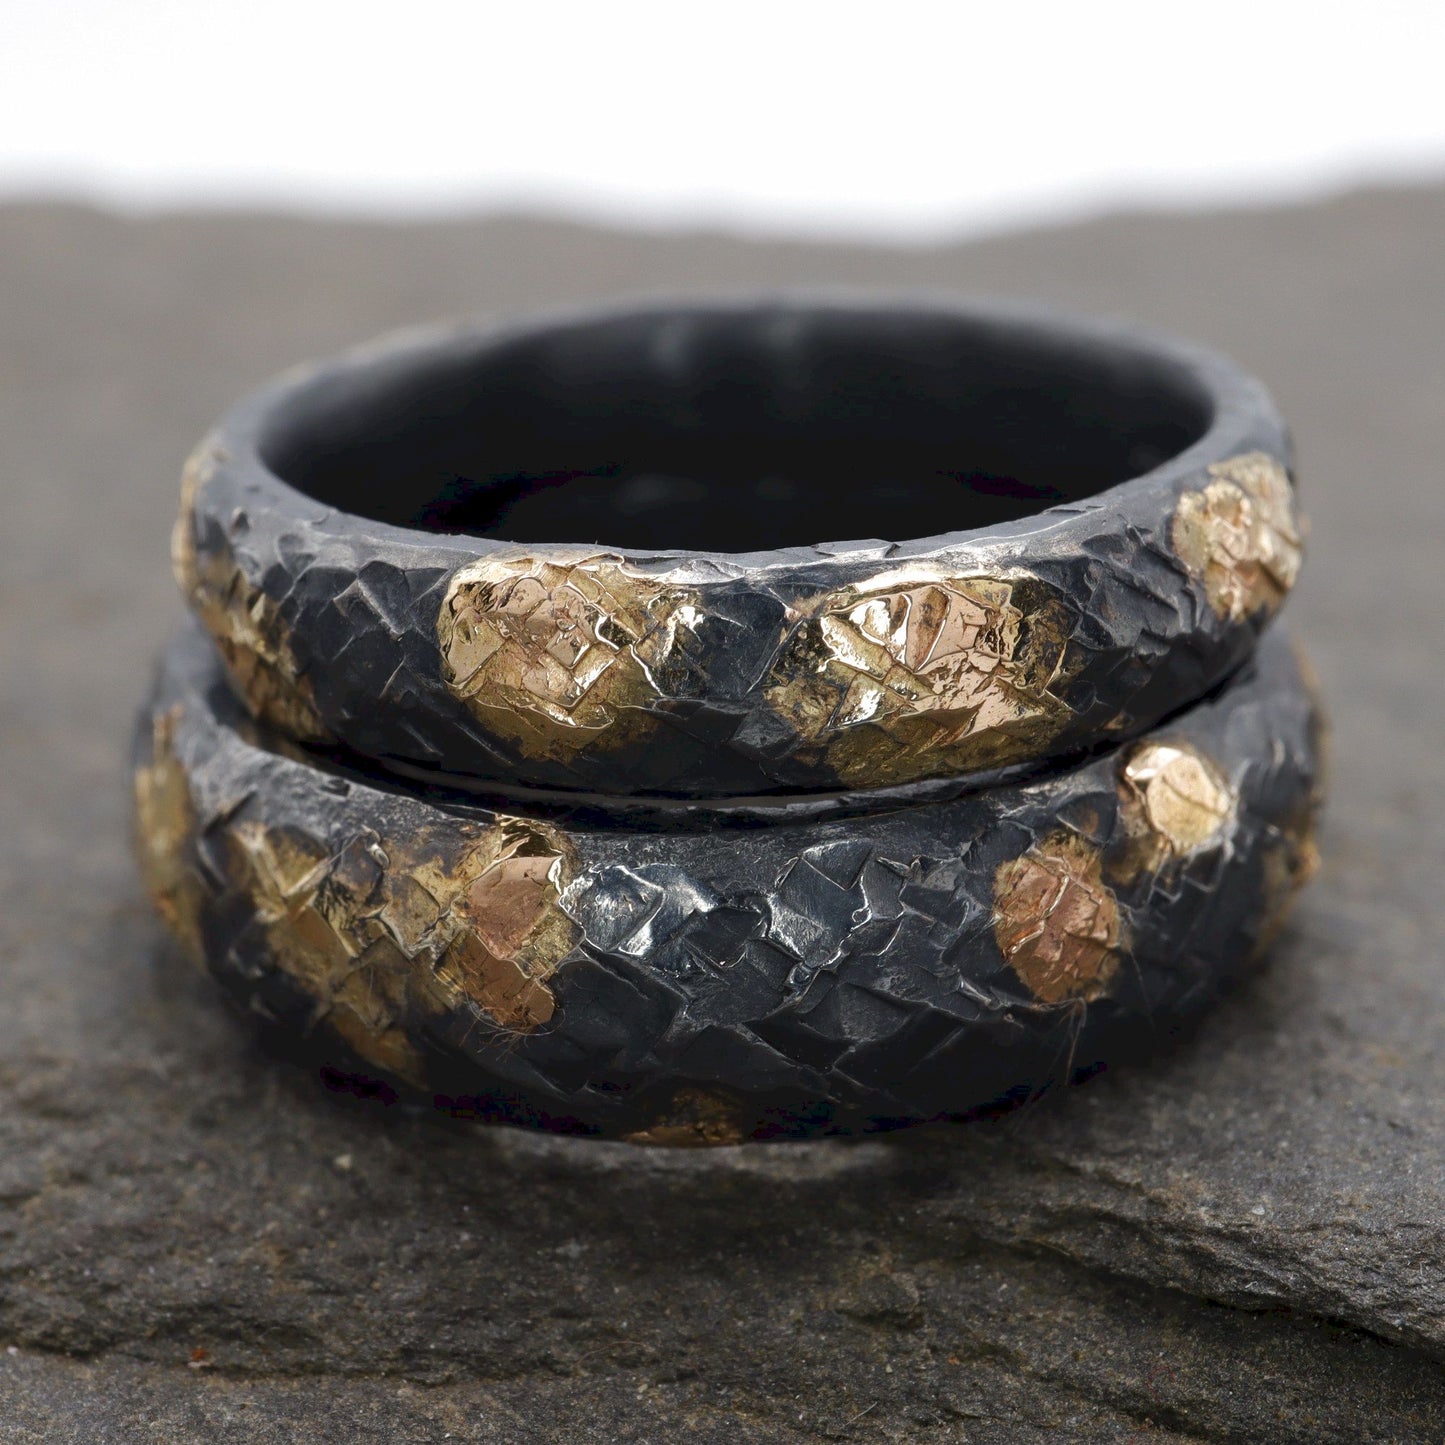 Black wedding ring set, black silver and gold hammered Night Sky design, 4mm and 6mm.